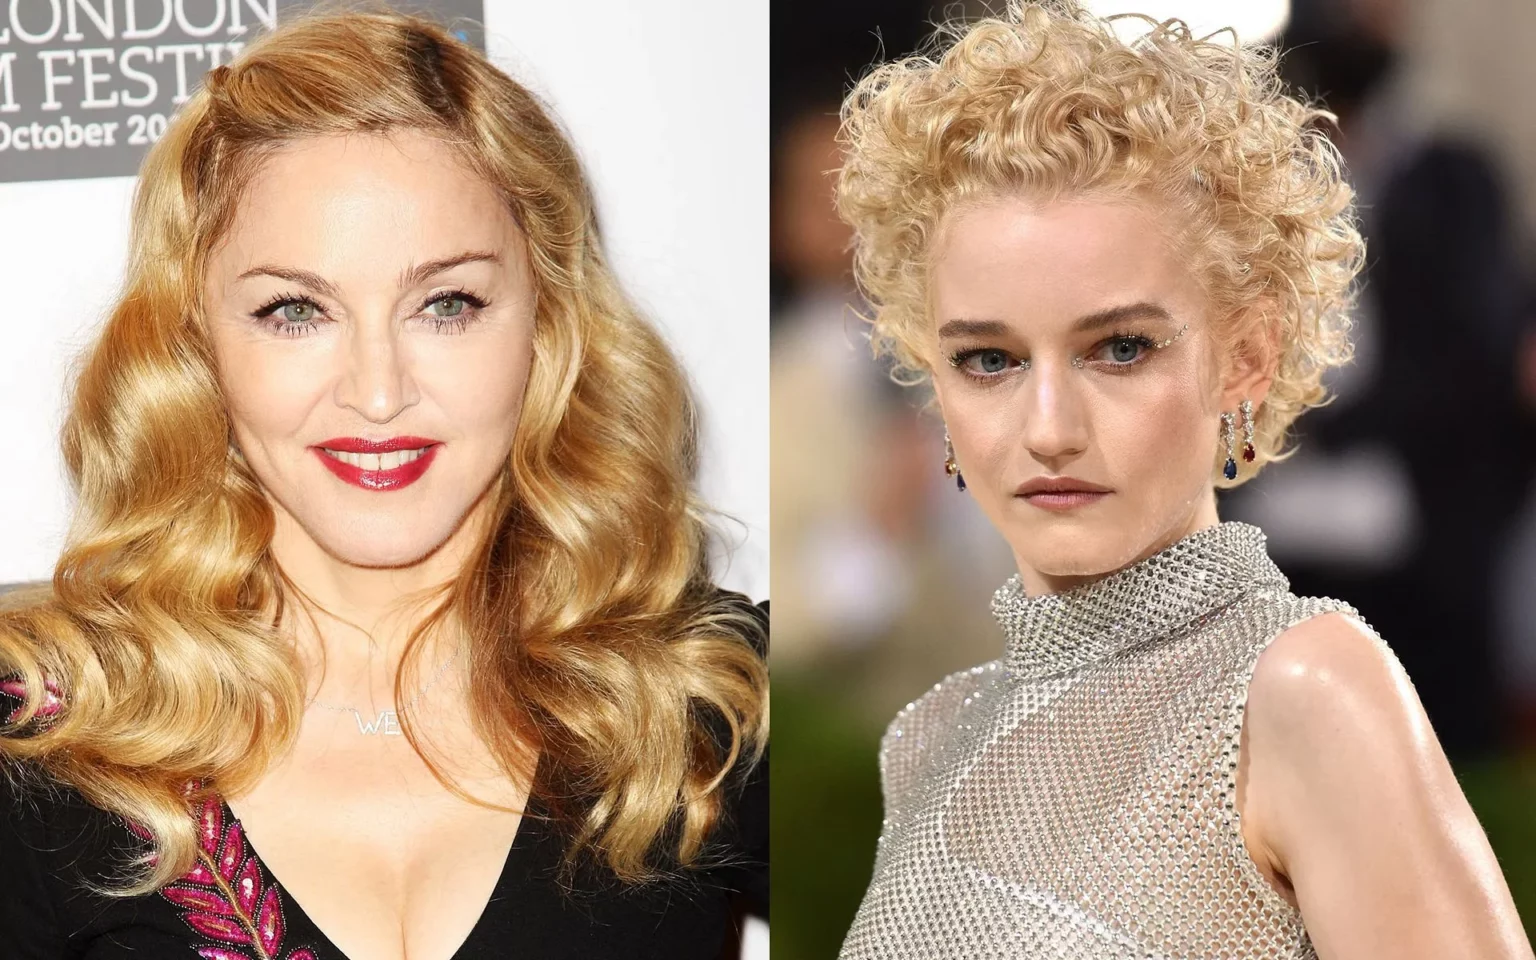 madonna-drops-photos-with-julia-garner-gives-glimpse-of-hope-for-her-biopic